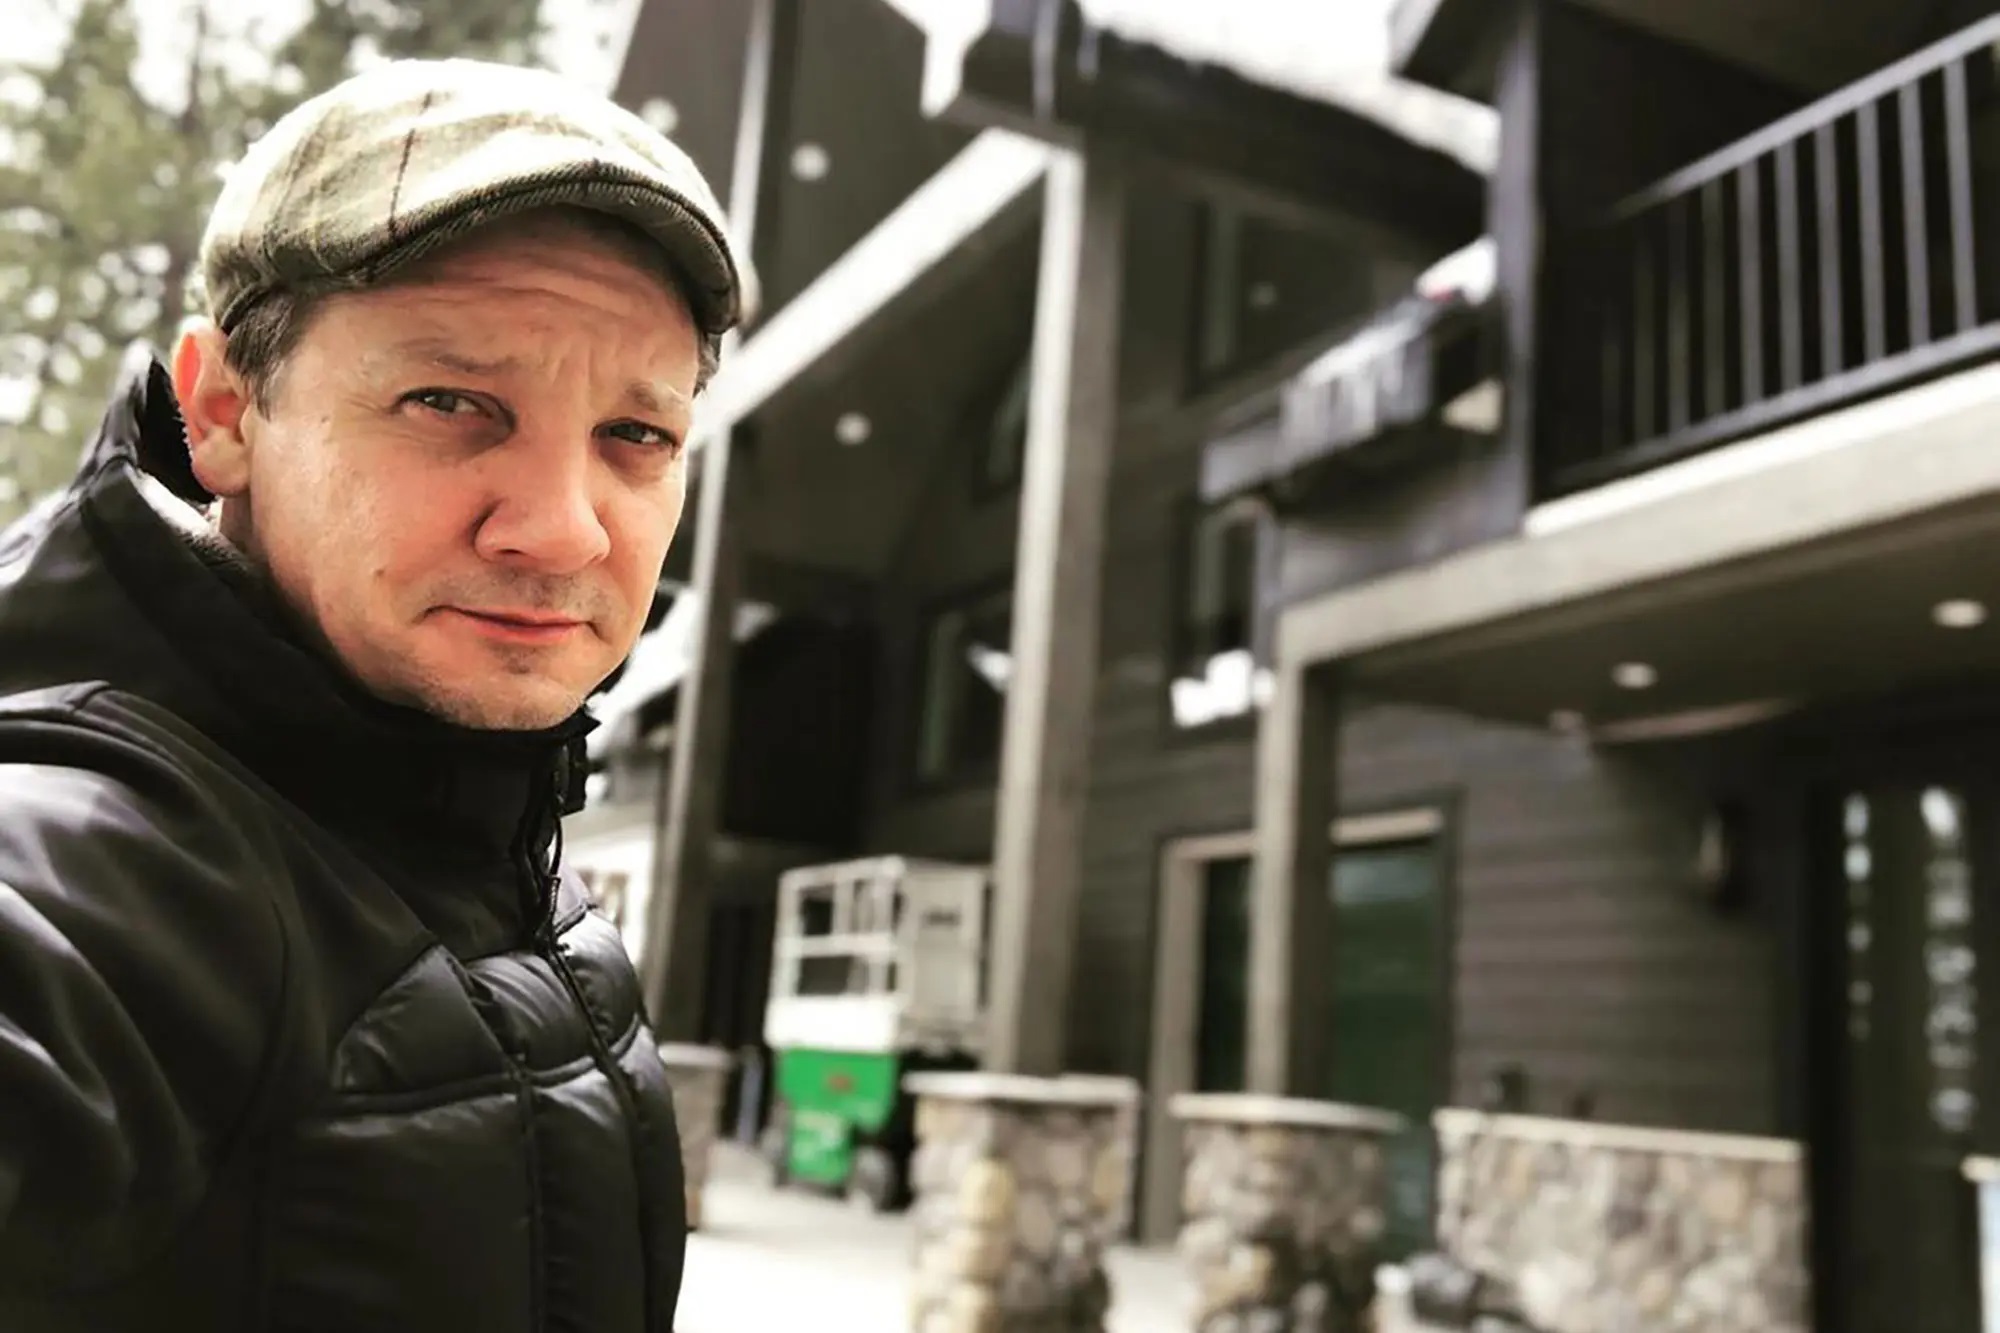 Marvel's Hawkeye Jeremy Renner snow plow Accident - Latest update - 2